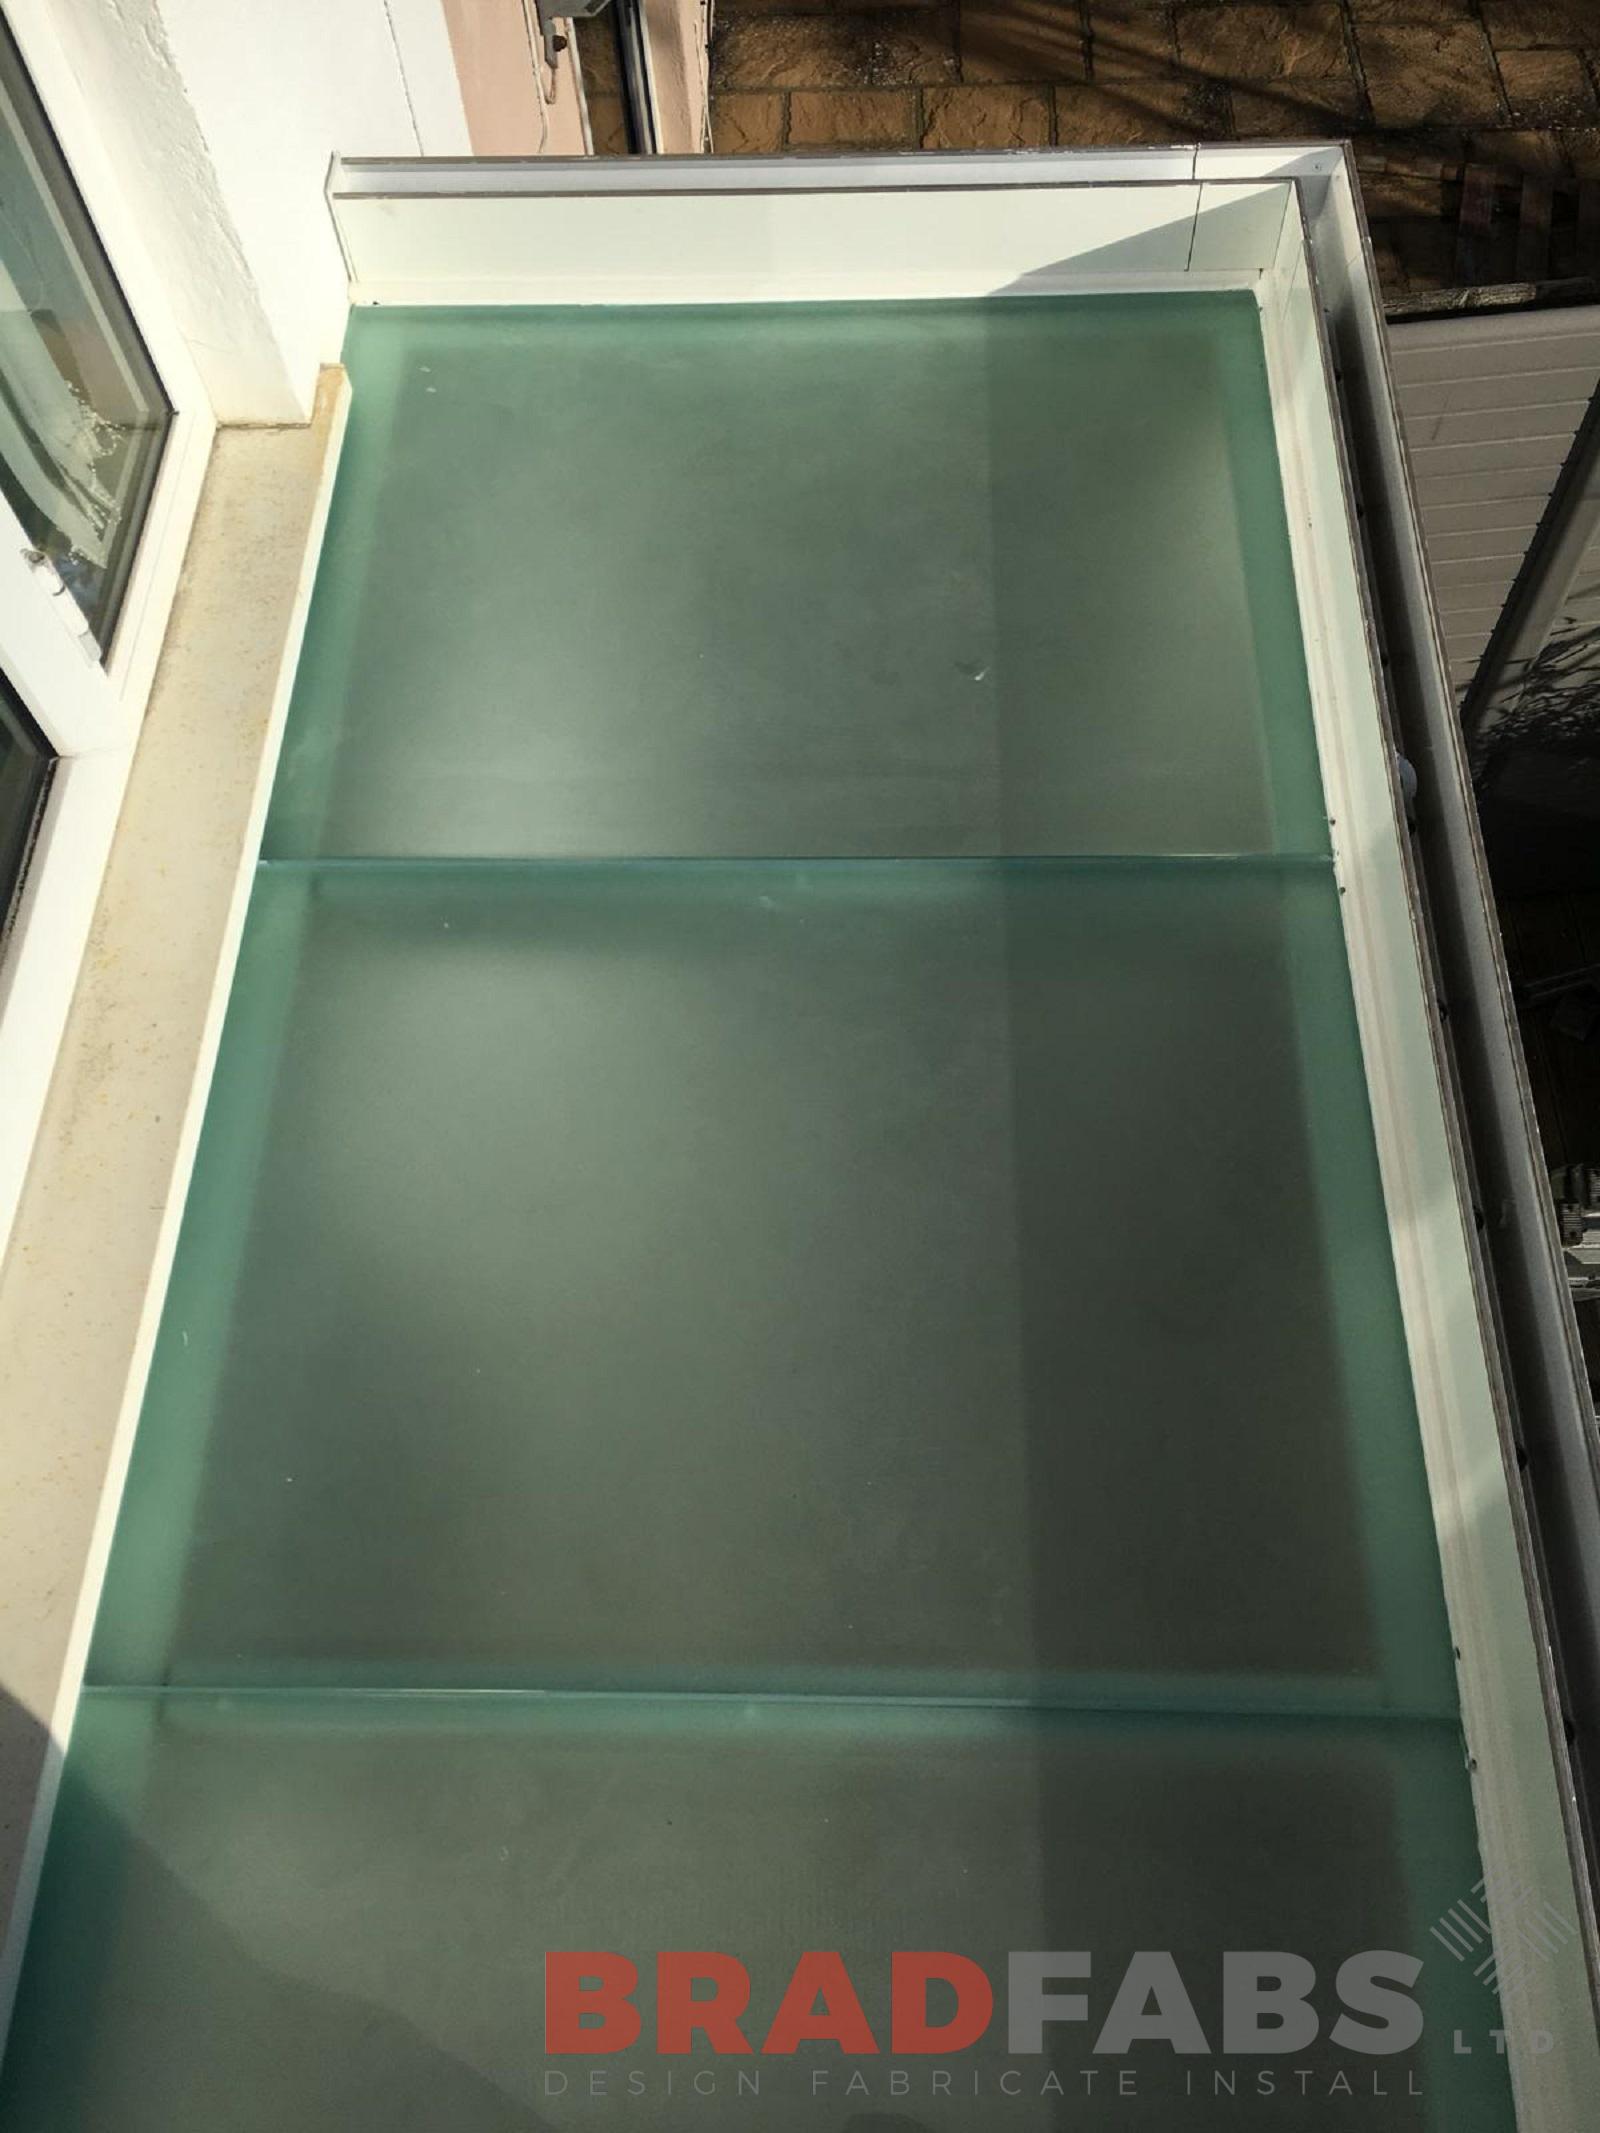 Solid opaque glass floor by Bradfabs  